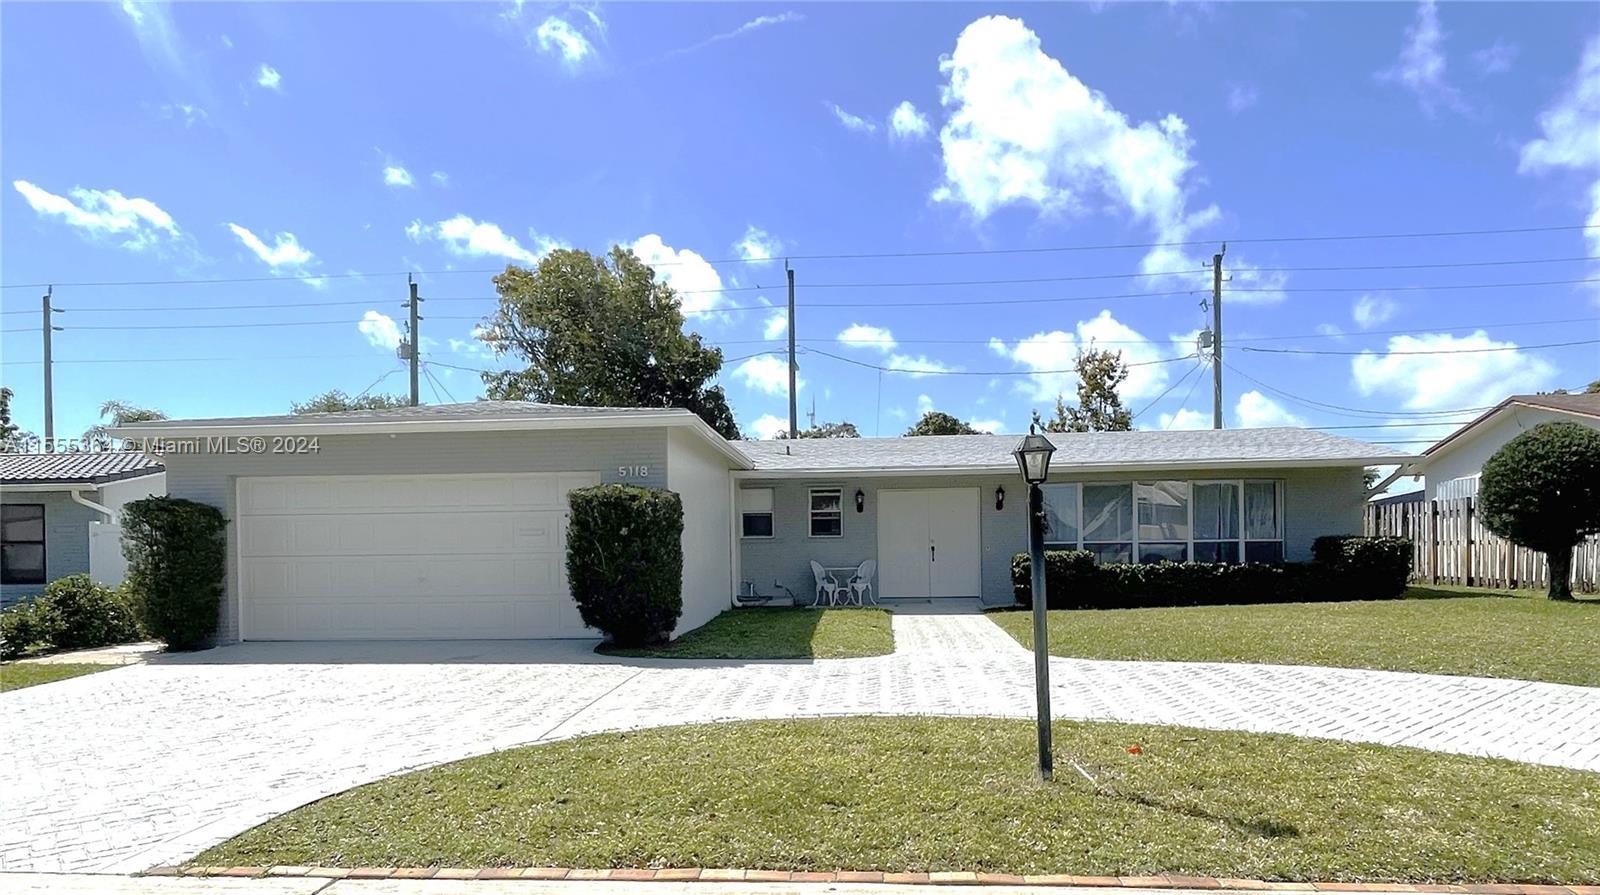 Photo of 5118 Adams St in Hollywood, FL